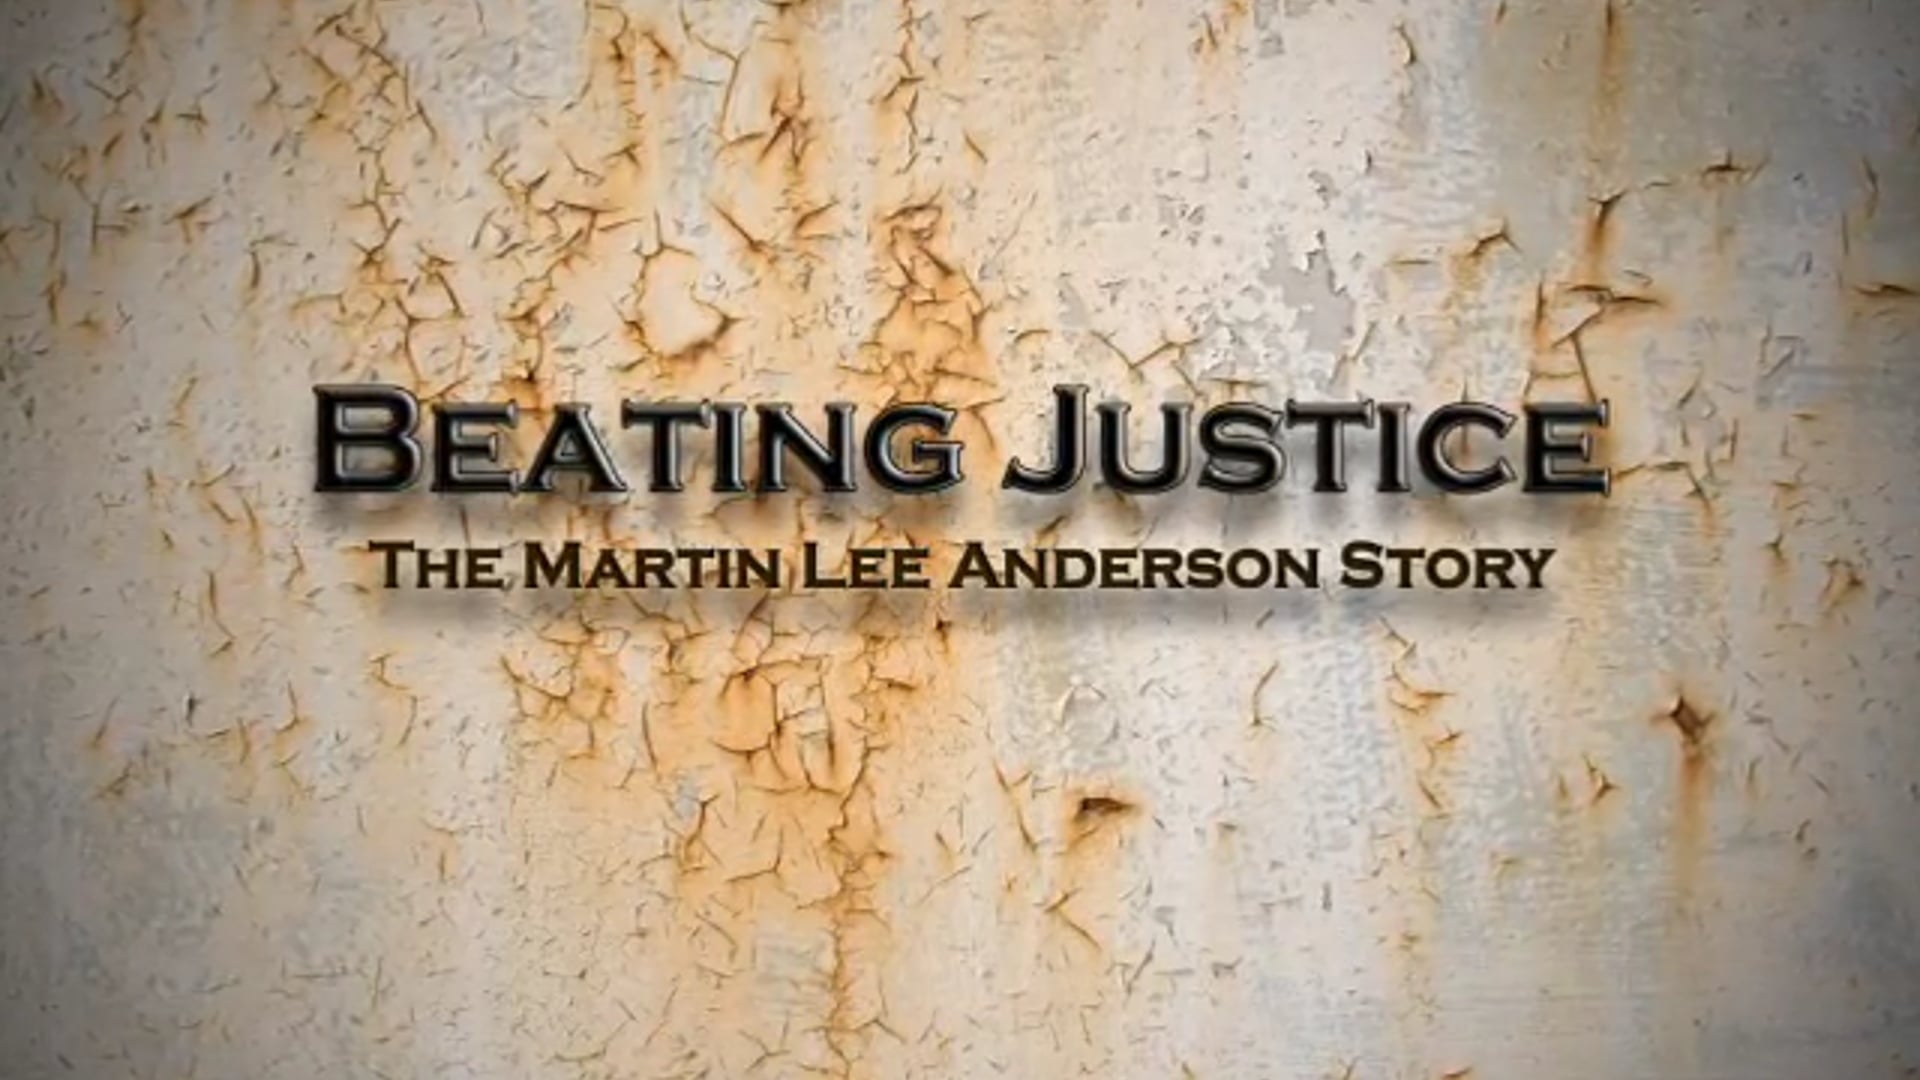 BEATING JUSTICE:  The Martin Lee Anderson Story